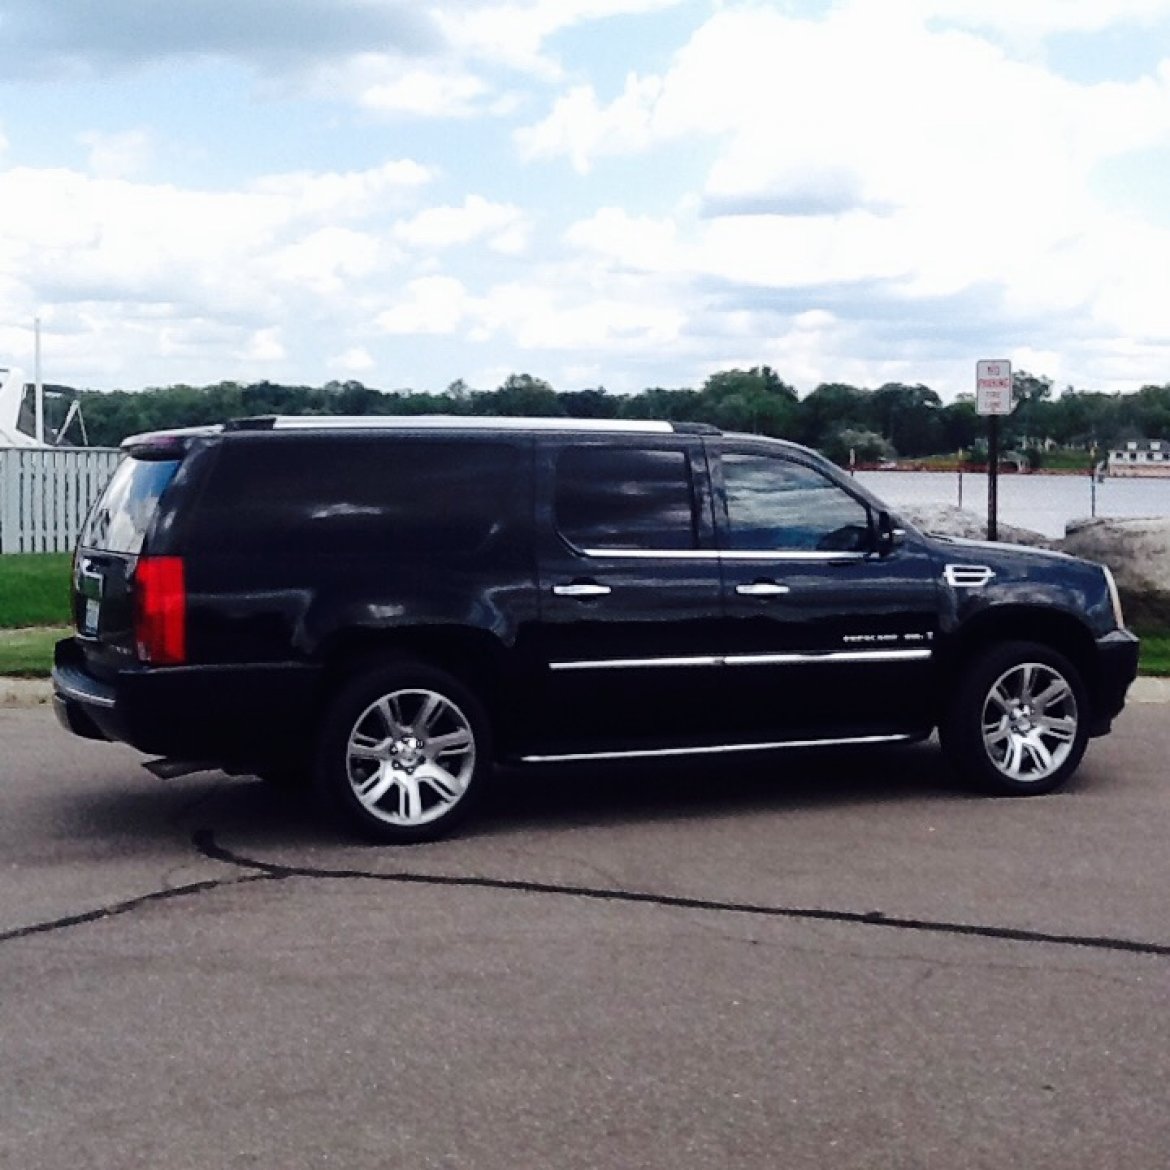 CEO SUV Mobile Office for sale: 2008 Cadillac Escalade  limo CEO